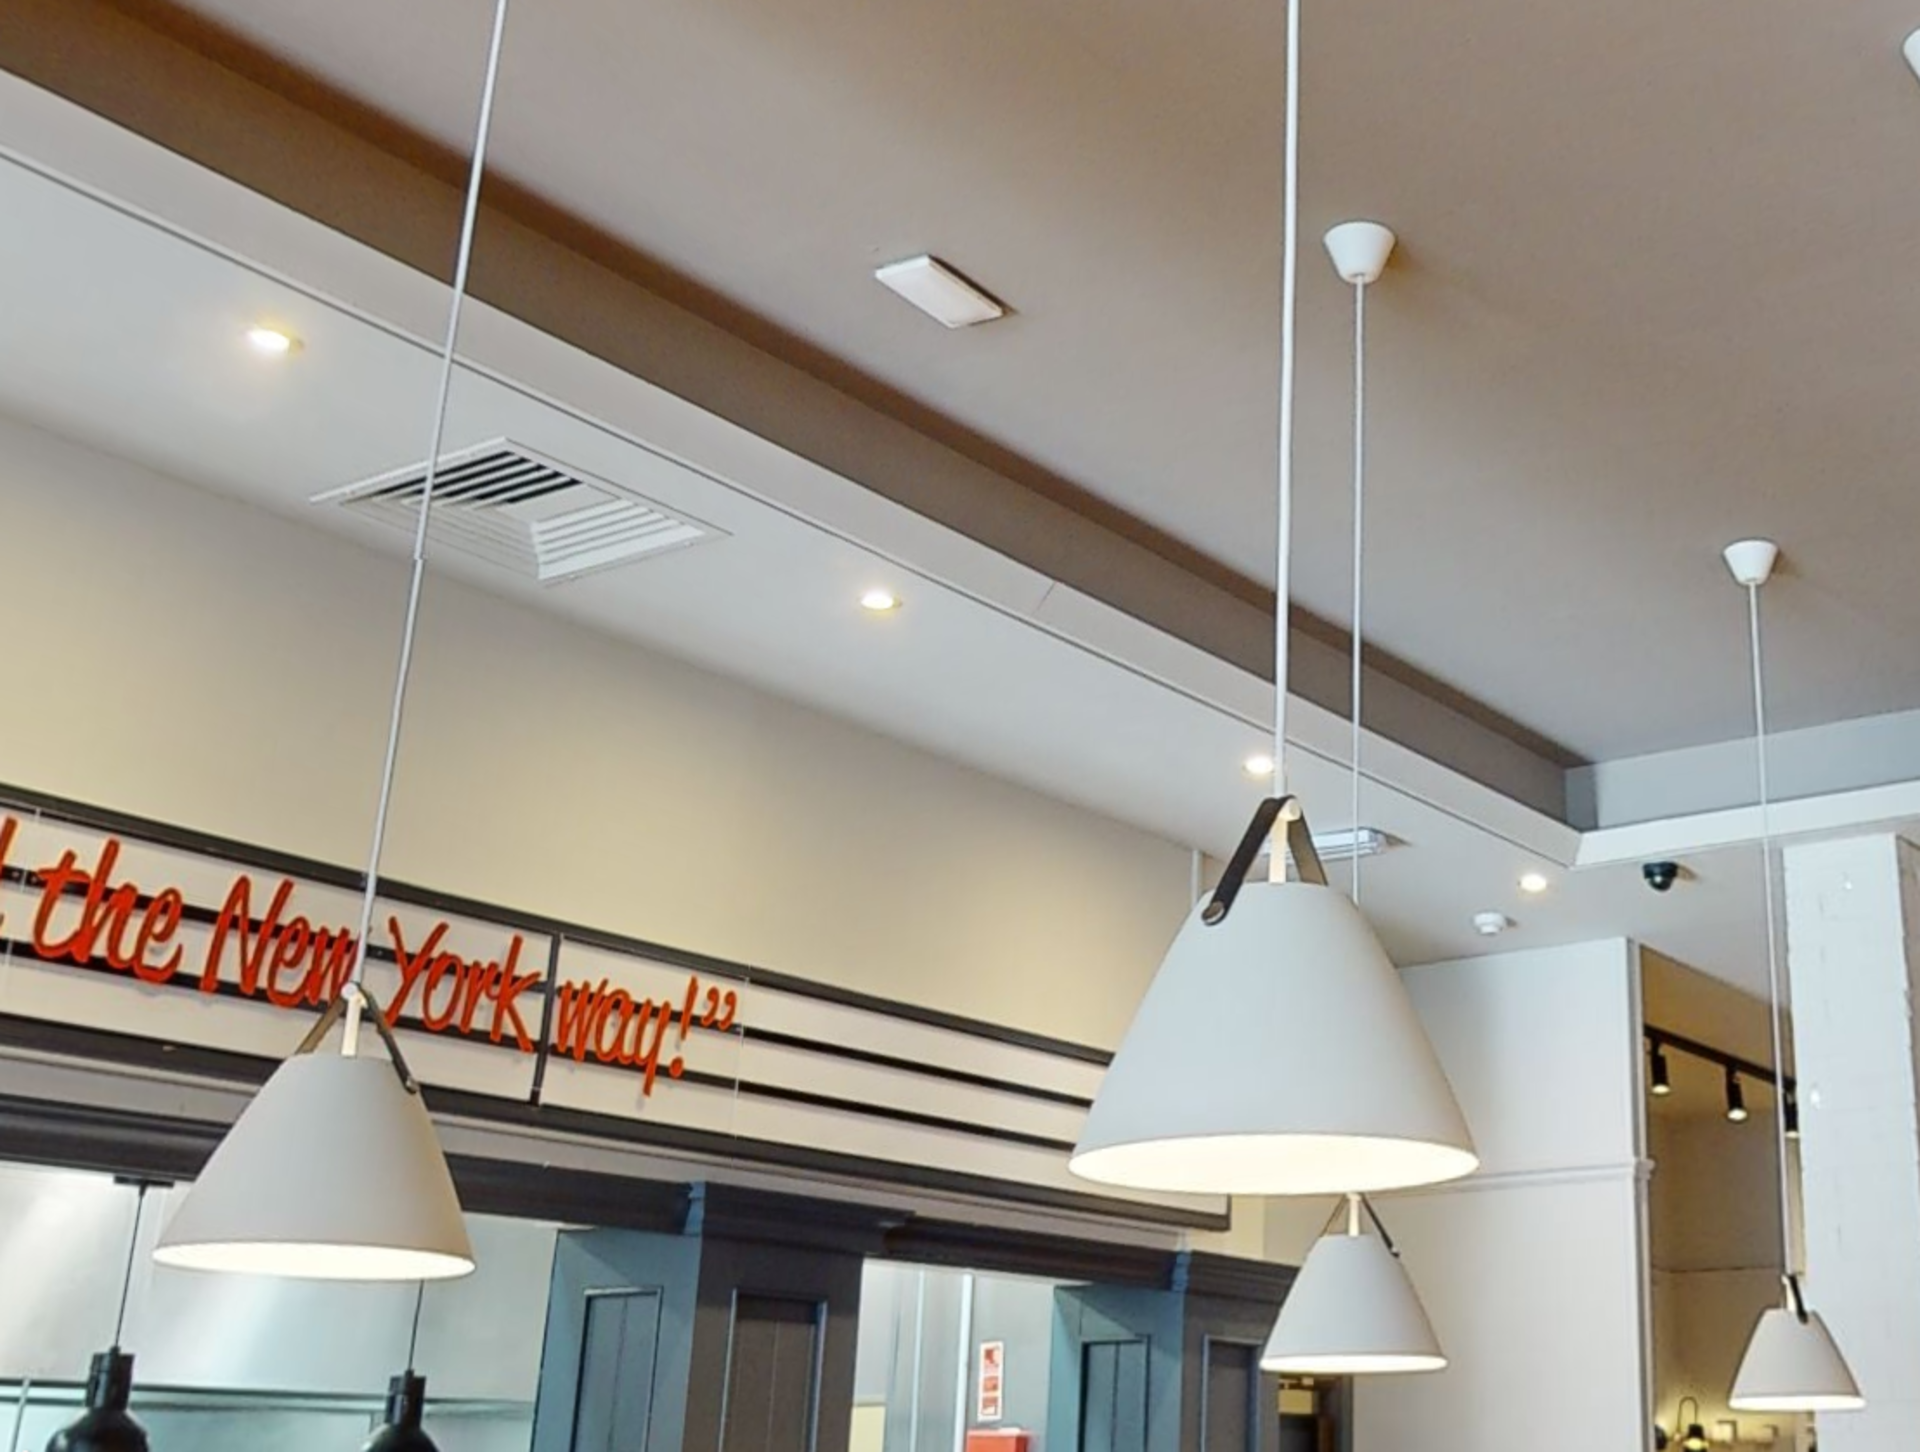 6 x Suspending Ceiling Pendant Lights Featuring Beige Metal Shades With Brown Leather Straps - Image 2 of 6